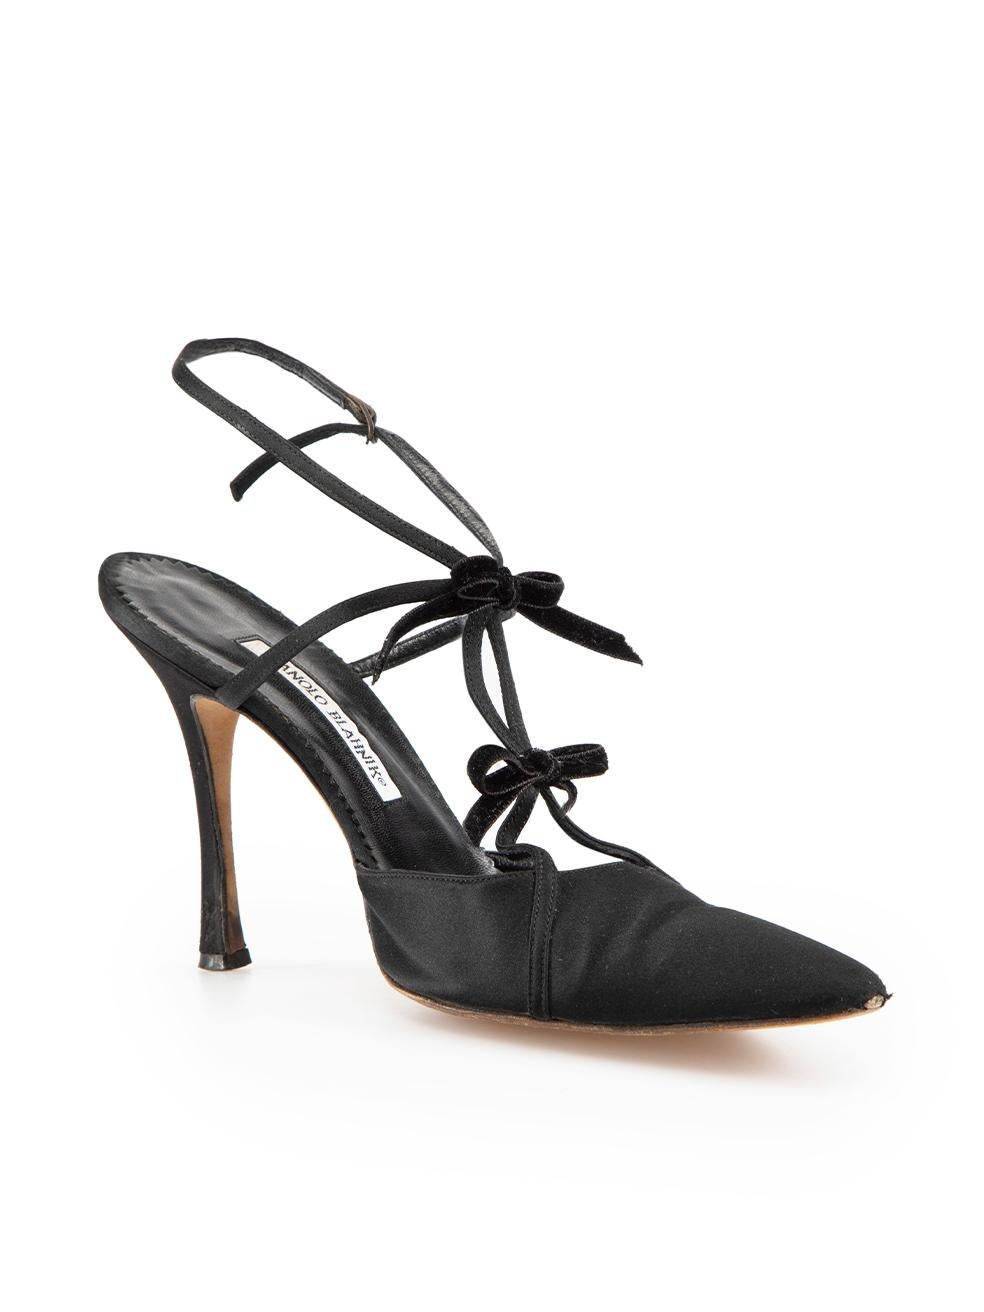 CONDITION is Good. General wear to shoes is evident. Moderate signs of wear to the toes and heels of both shoes with plucks and indents to the satin. Both bow ends also are beginning to fray on this used Manolo Blahnik designer resale item.
 
